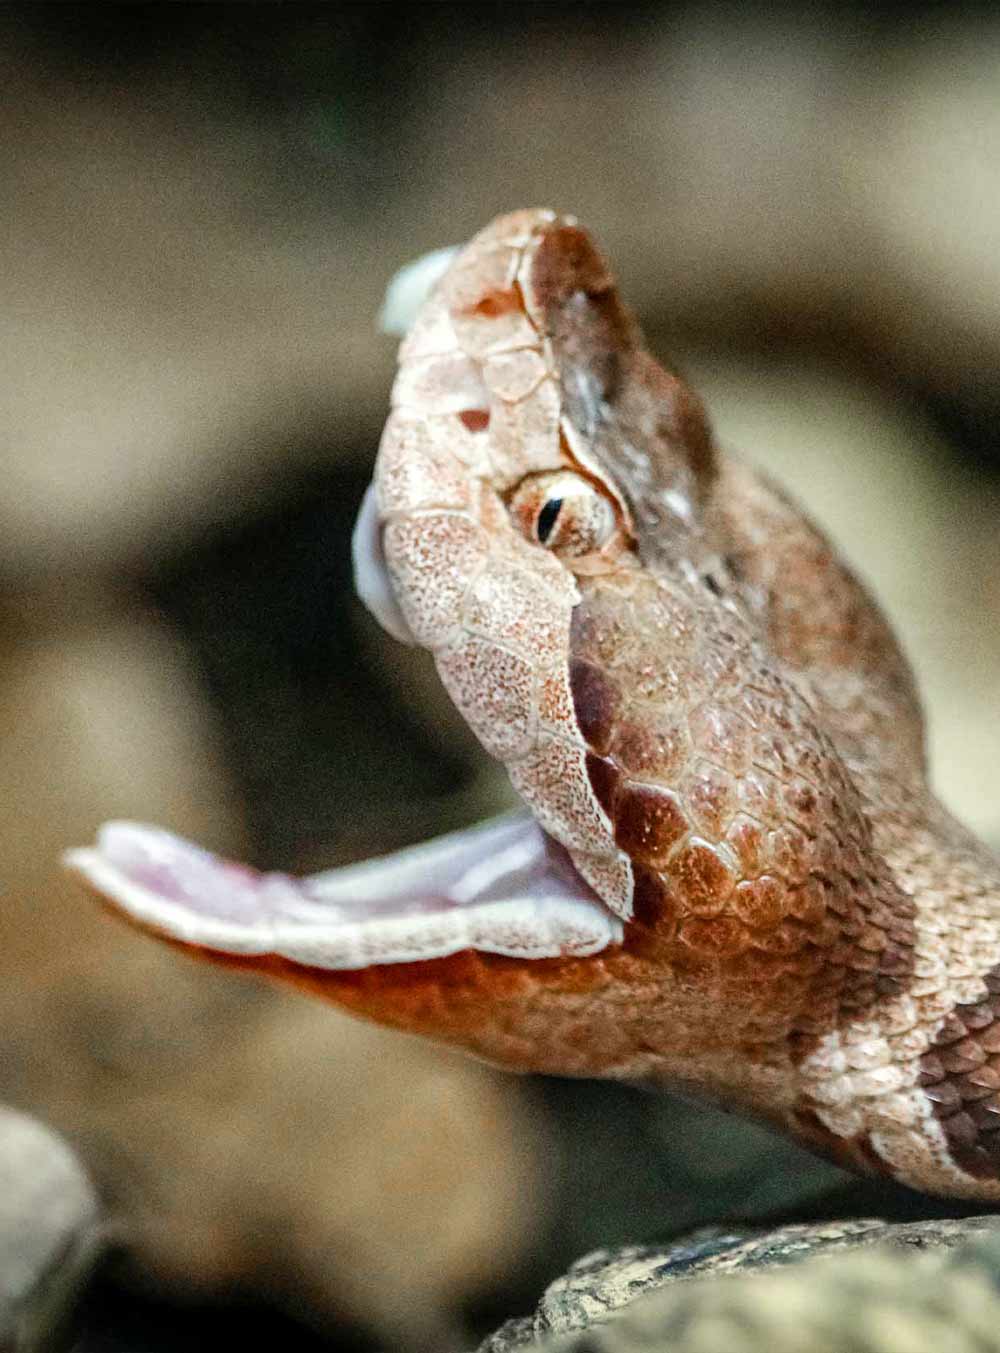 Close up of a copperhead's eye